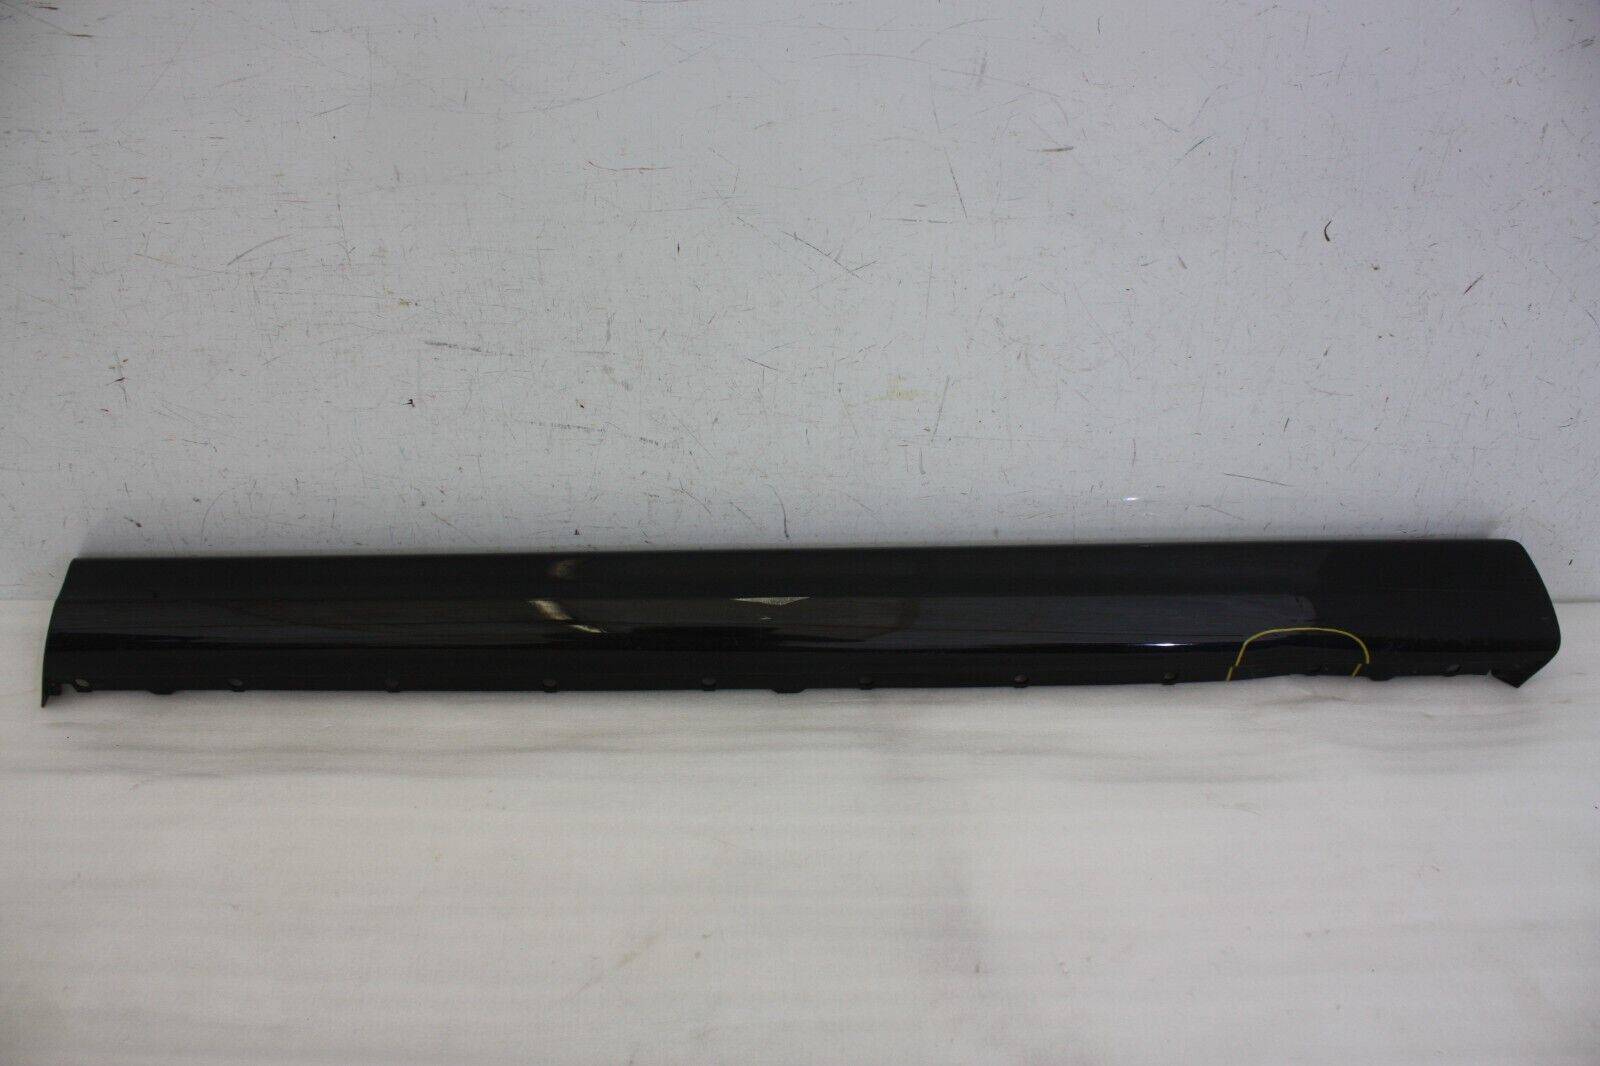 Mercedes Vito W447 Left Side Door Sill Moulding A4476905601 Genuine 176302504694